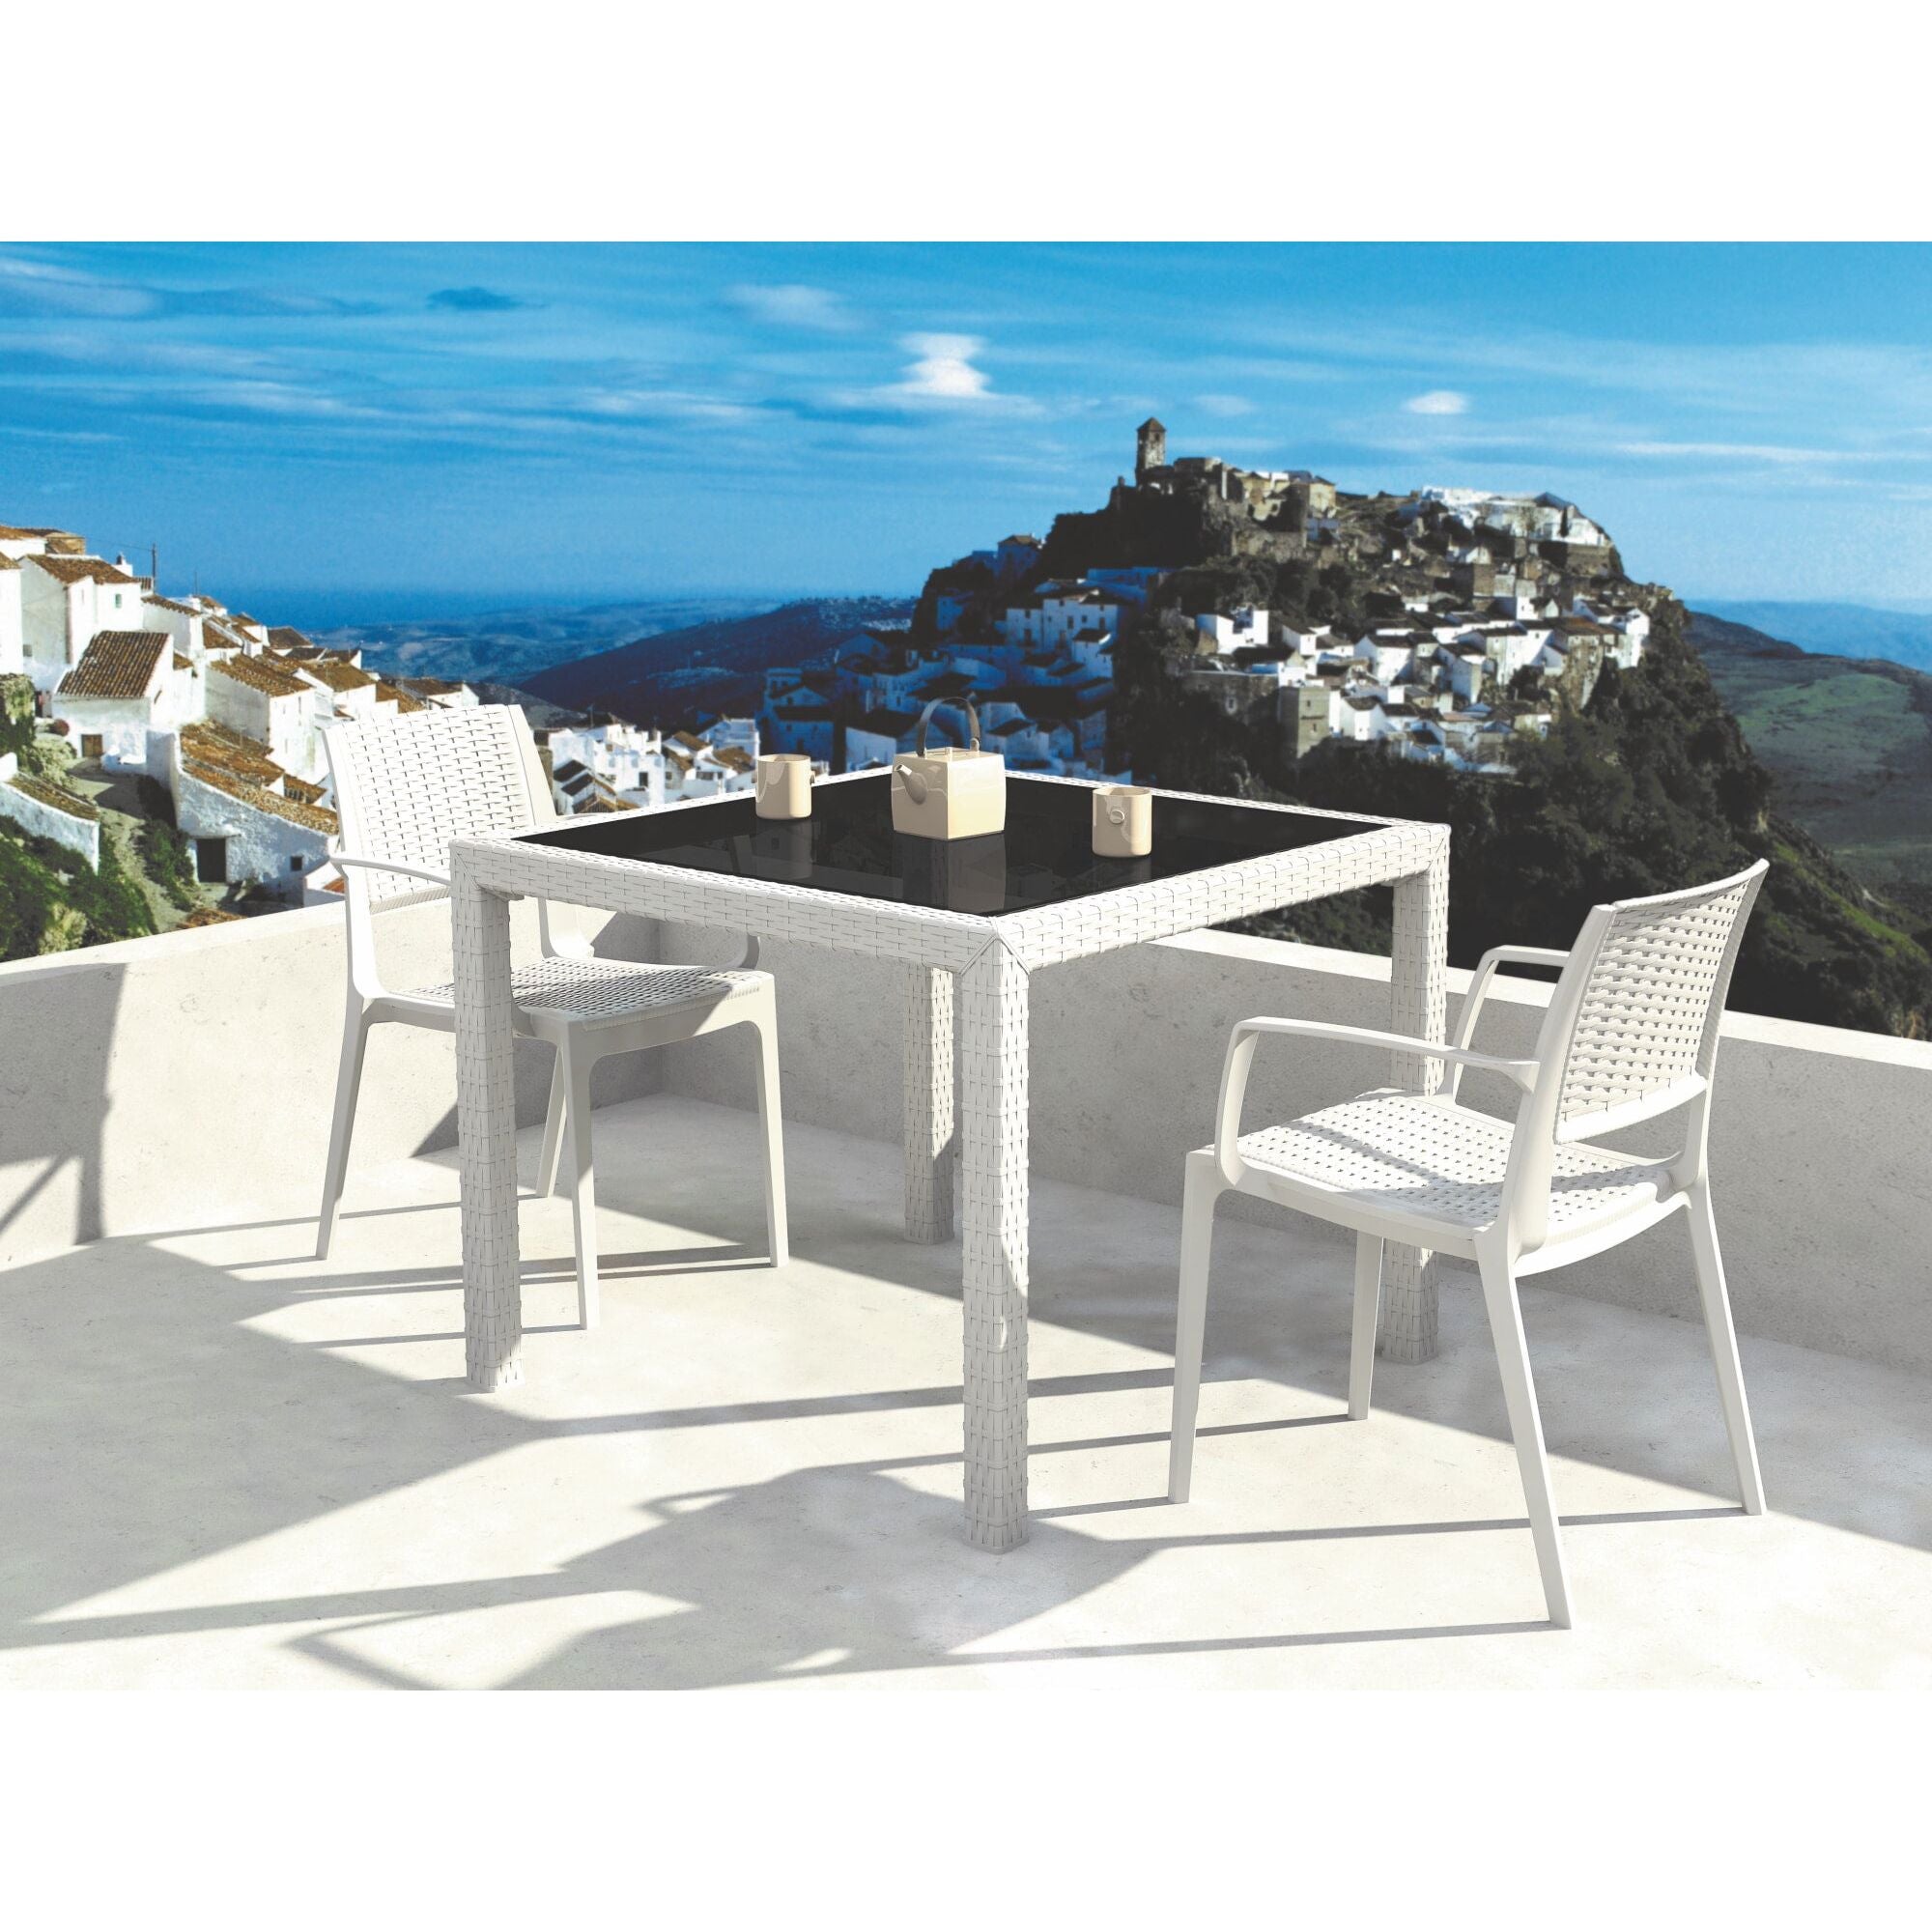 Garbar Atlantic Square table indoors, outdoors 94x94 White